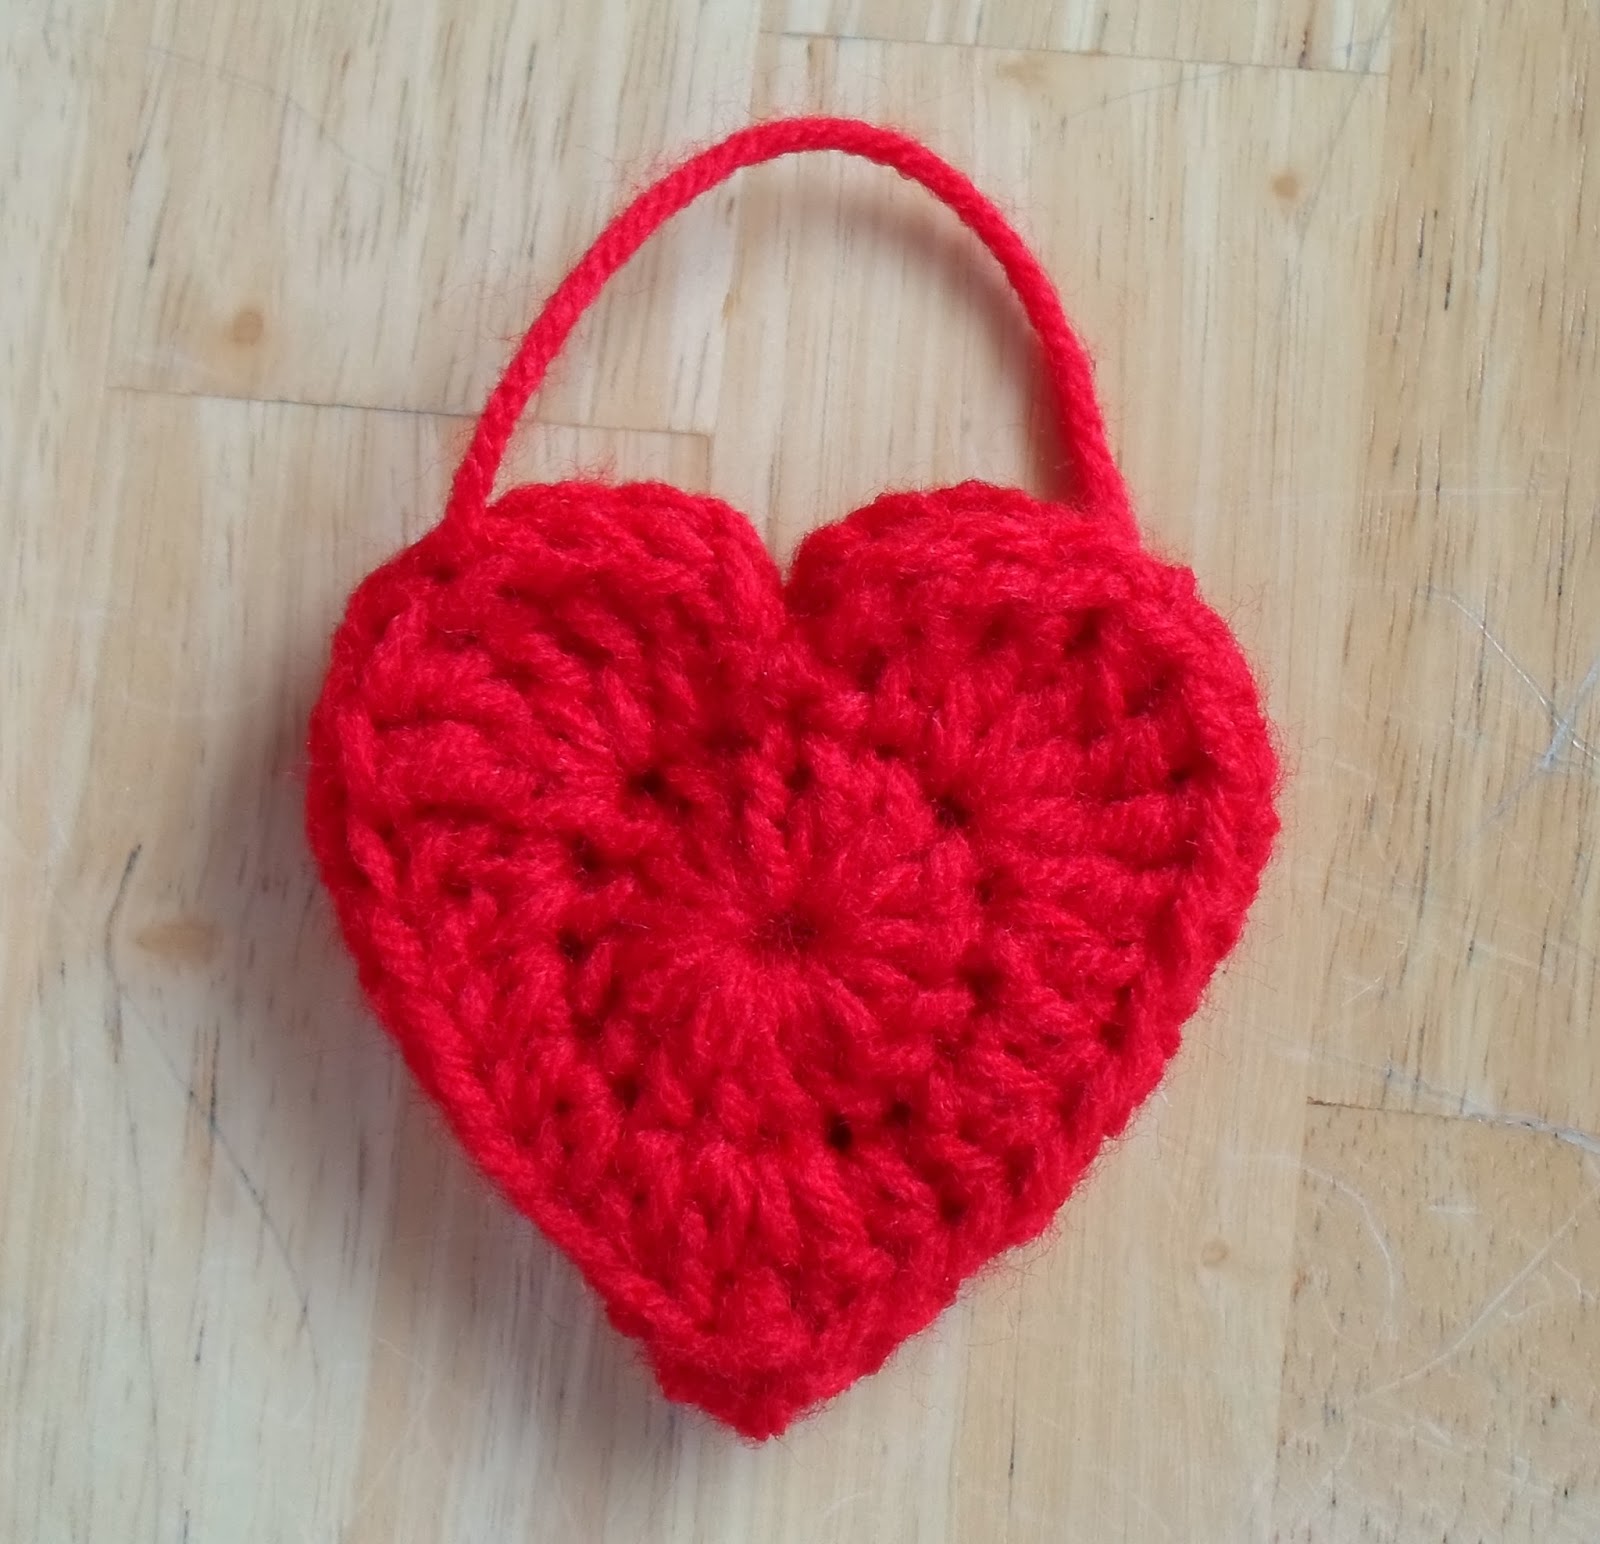 Happier Than A Pig In Mud: Heart Shaped Bag or Pillow for Barbie-Crochet